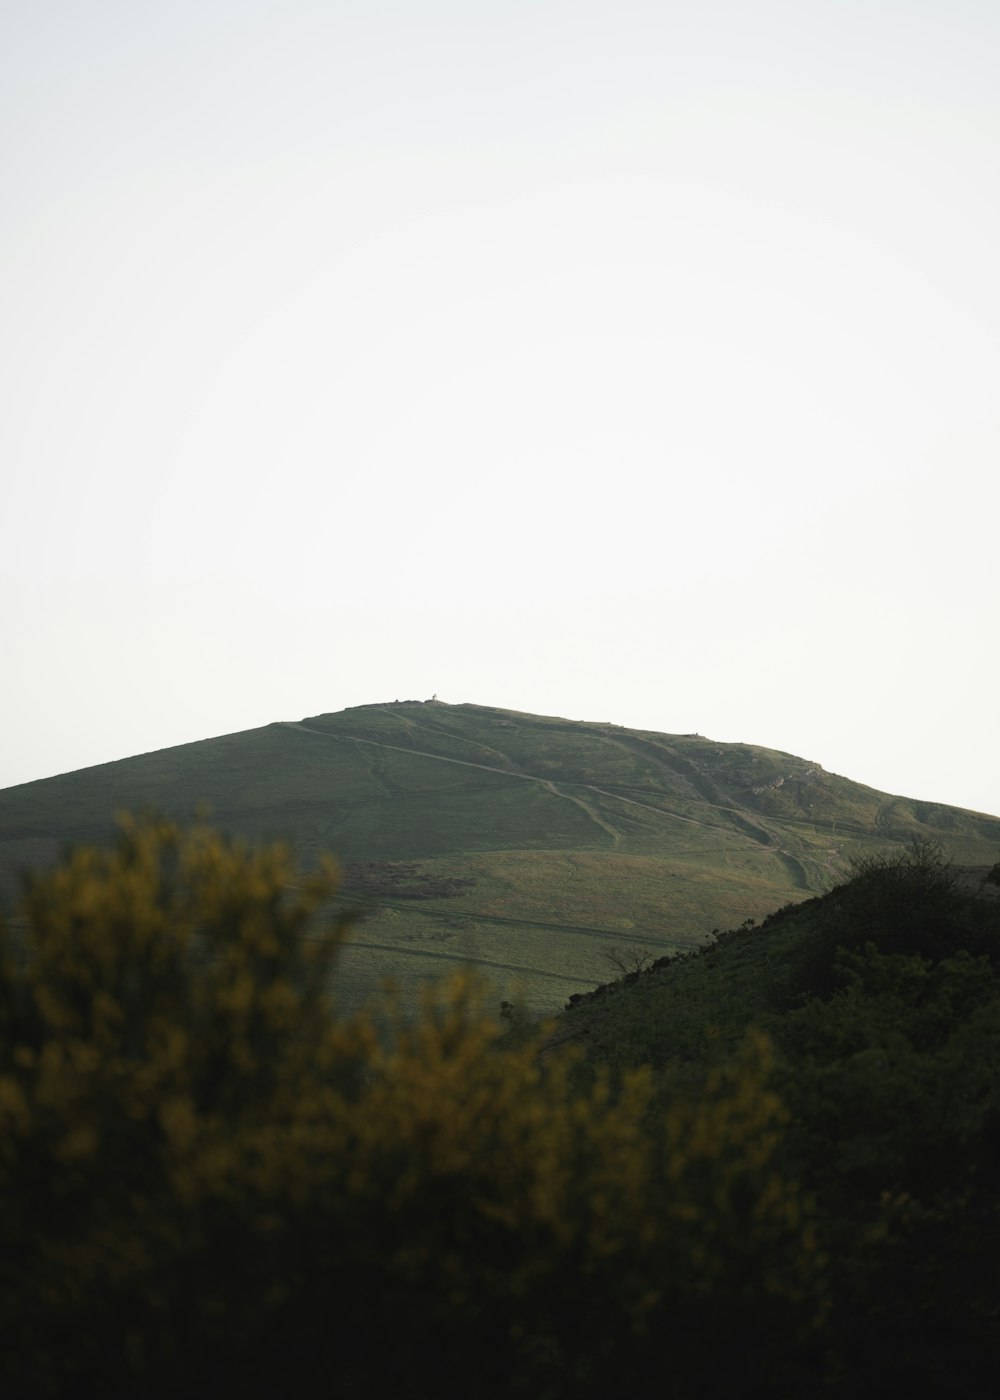 a hill with a tree in the foreground